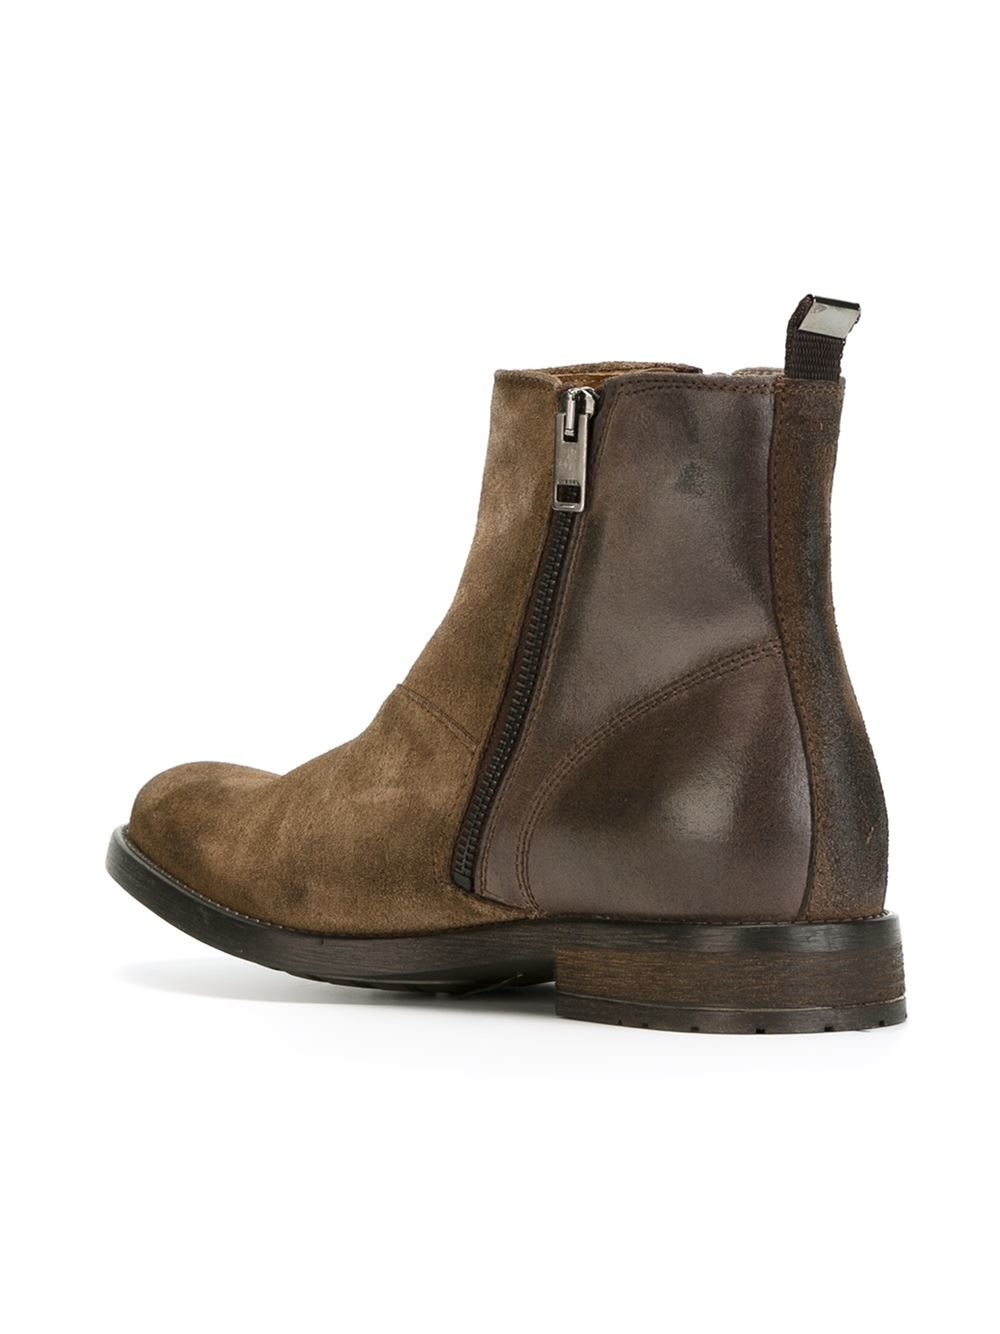 Diesel 'd-anklyx' Ankle Boots in Brown for Men | Lyst